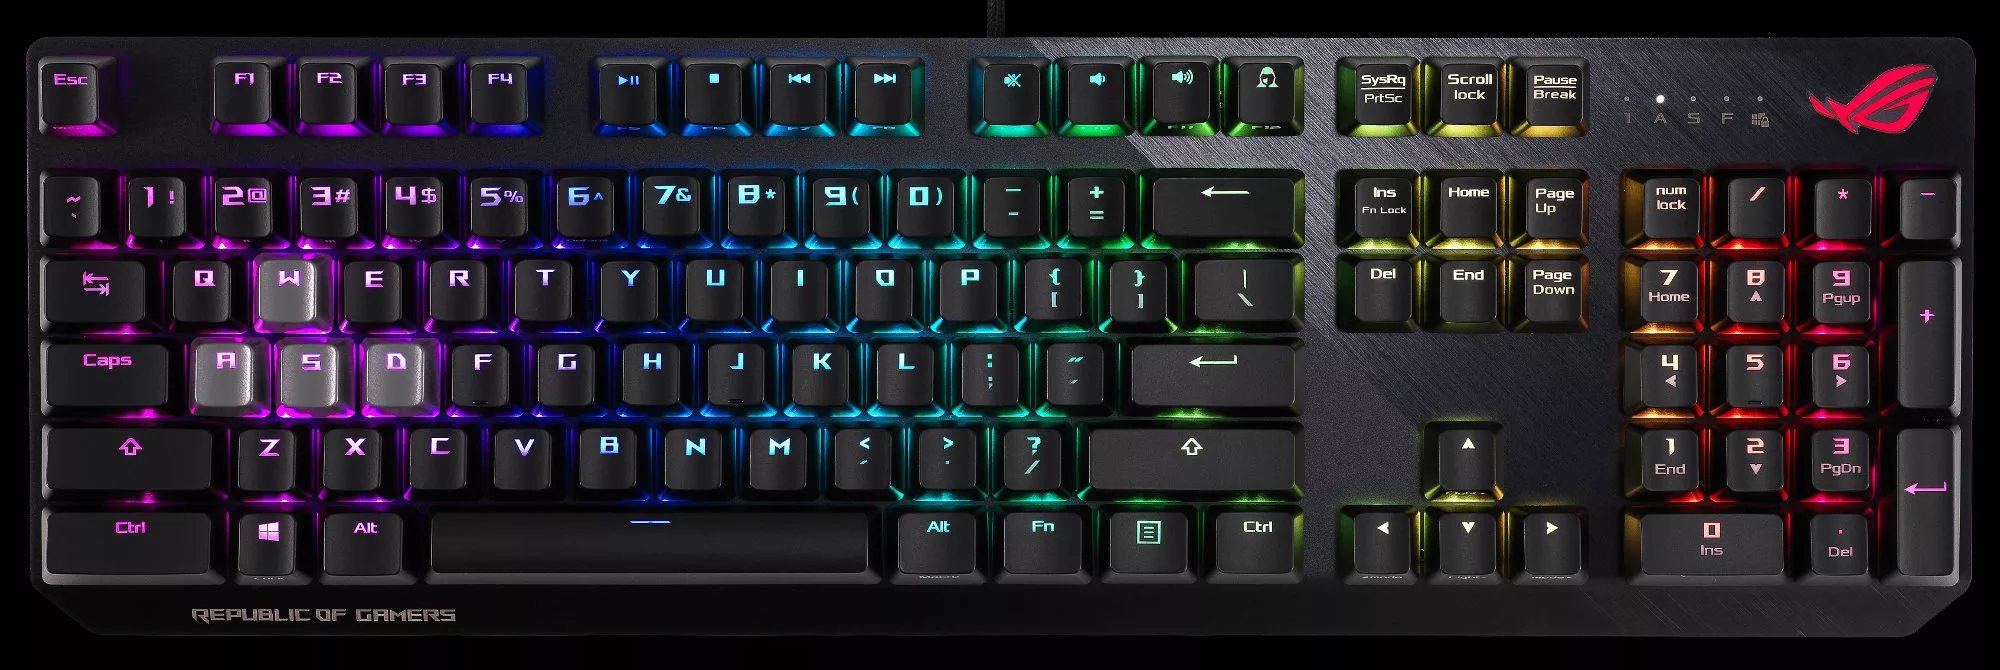 Power play: The ROG Strix Scope mechanical keyboard is made for FPS gamers  | ROG - Republic of Gamers Global